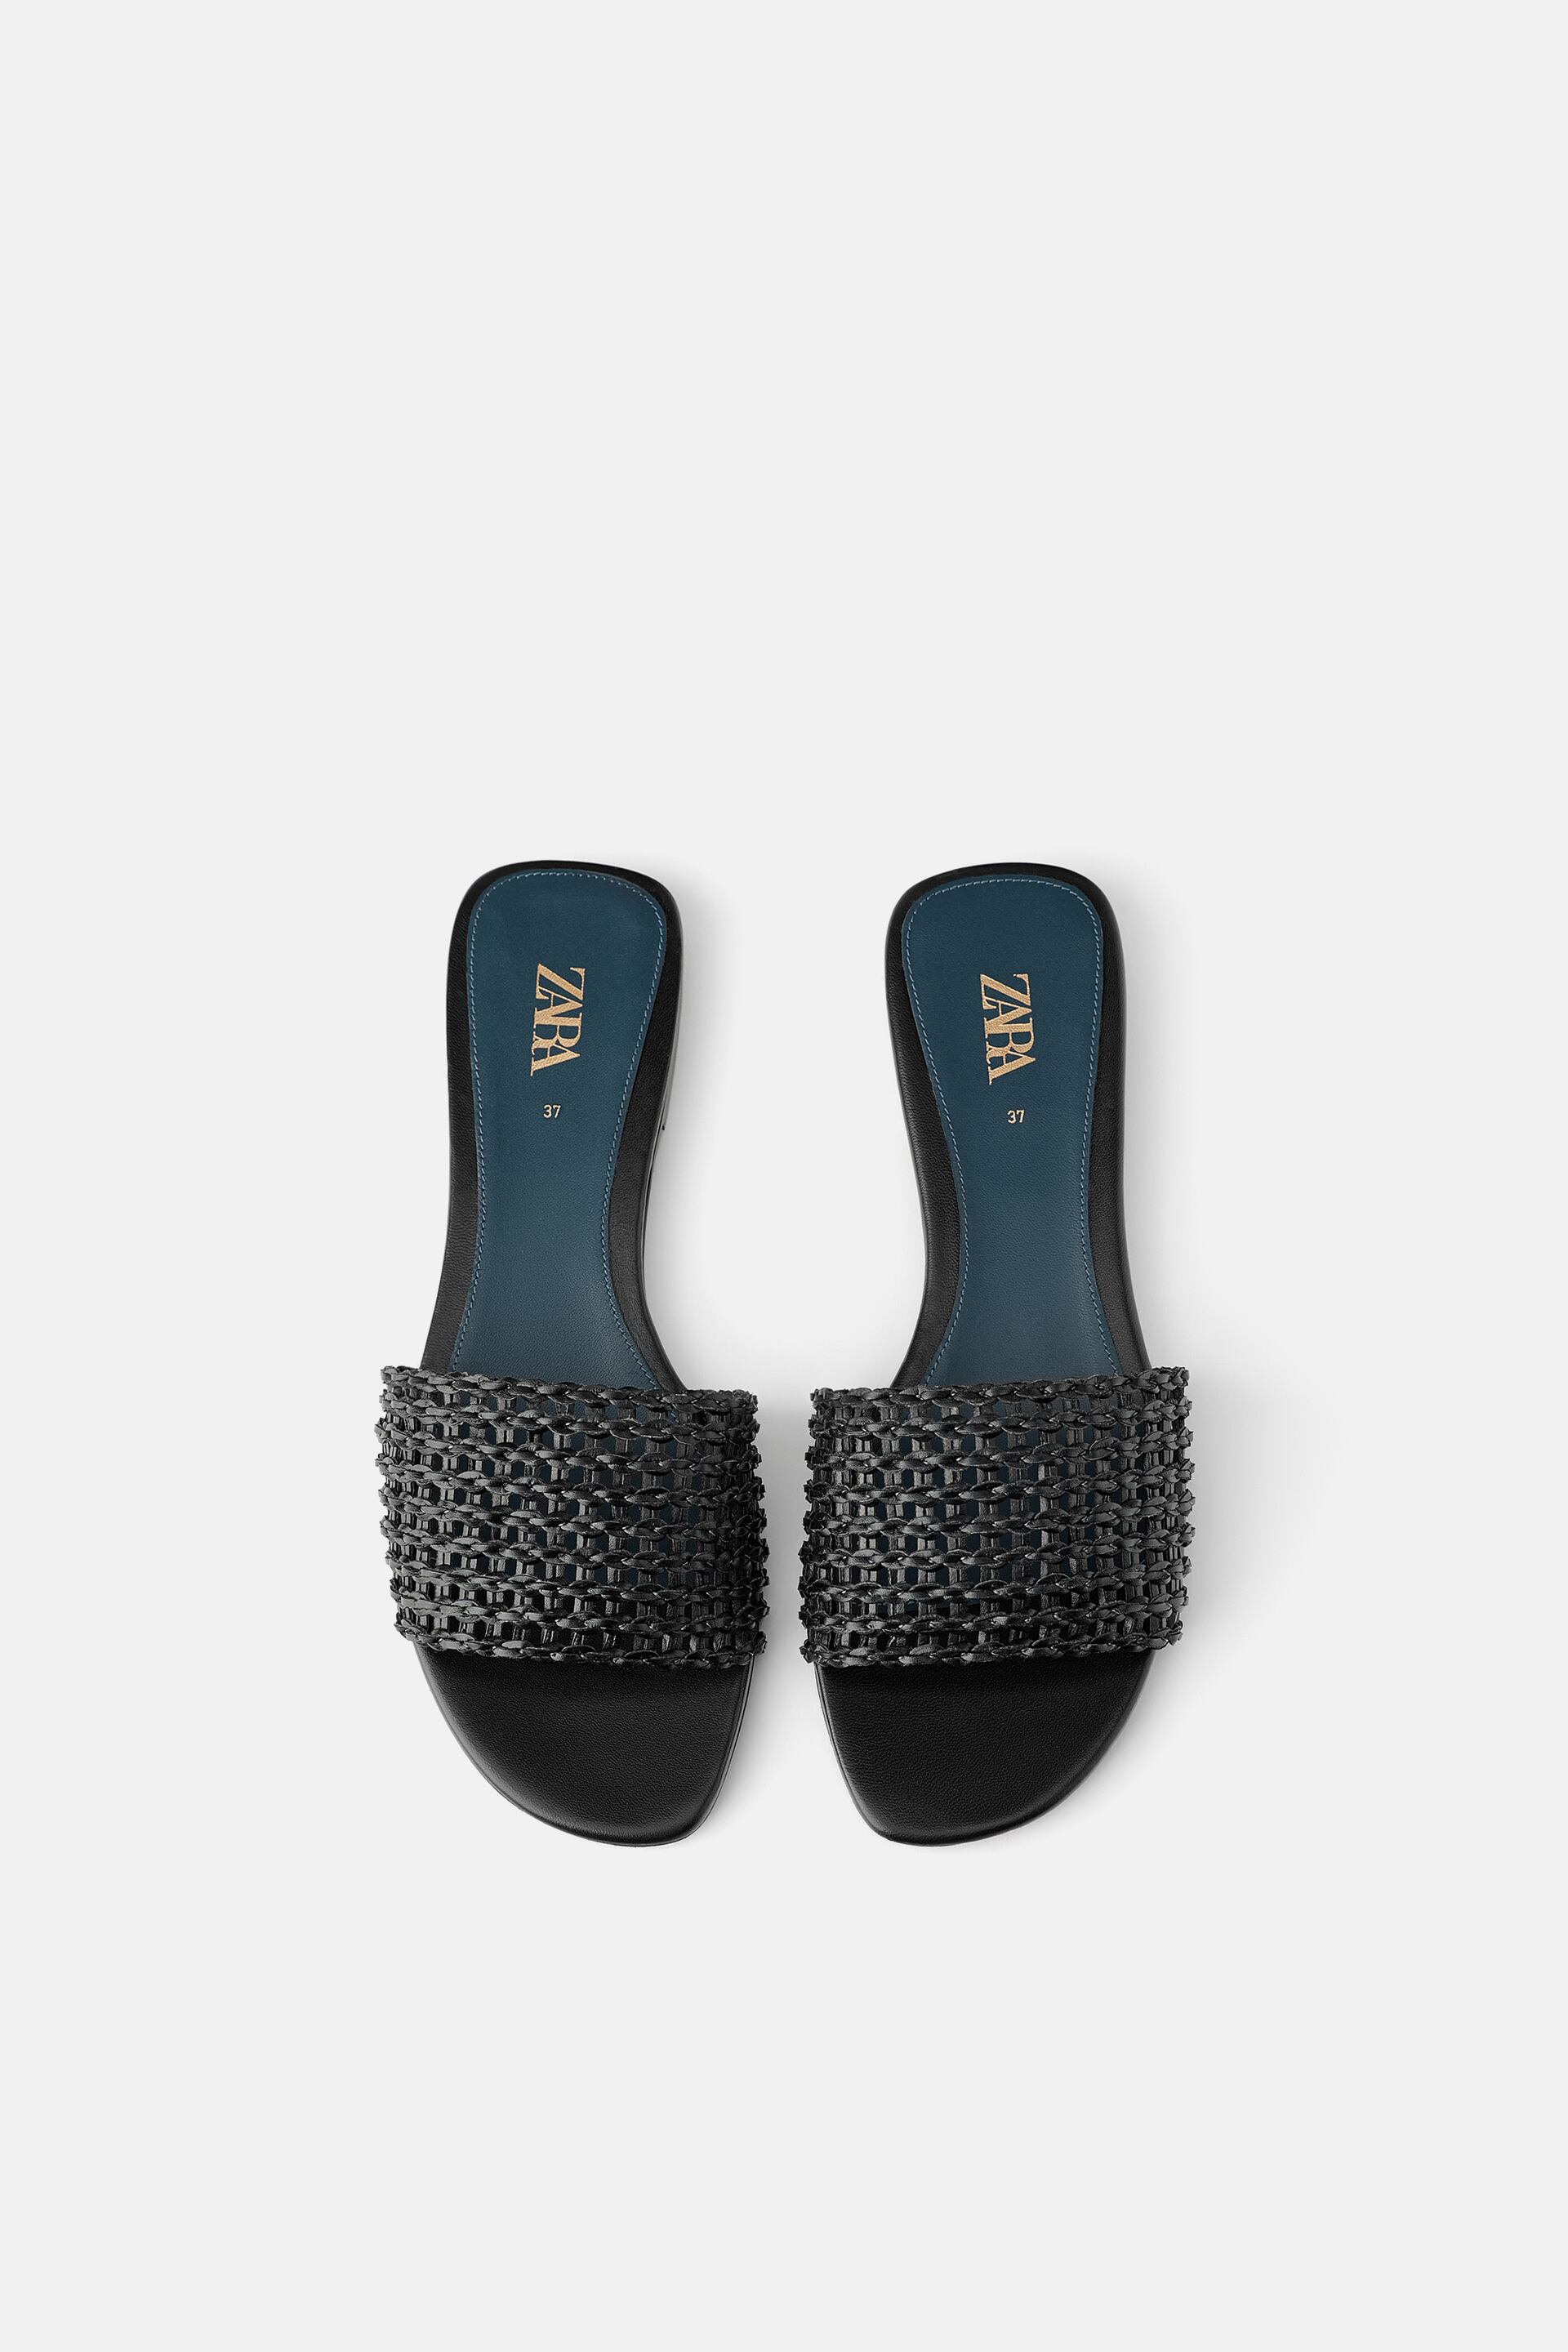 Image 3 of BLUE COLLECTION FLAT SANDALS by Zara